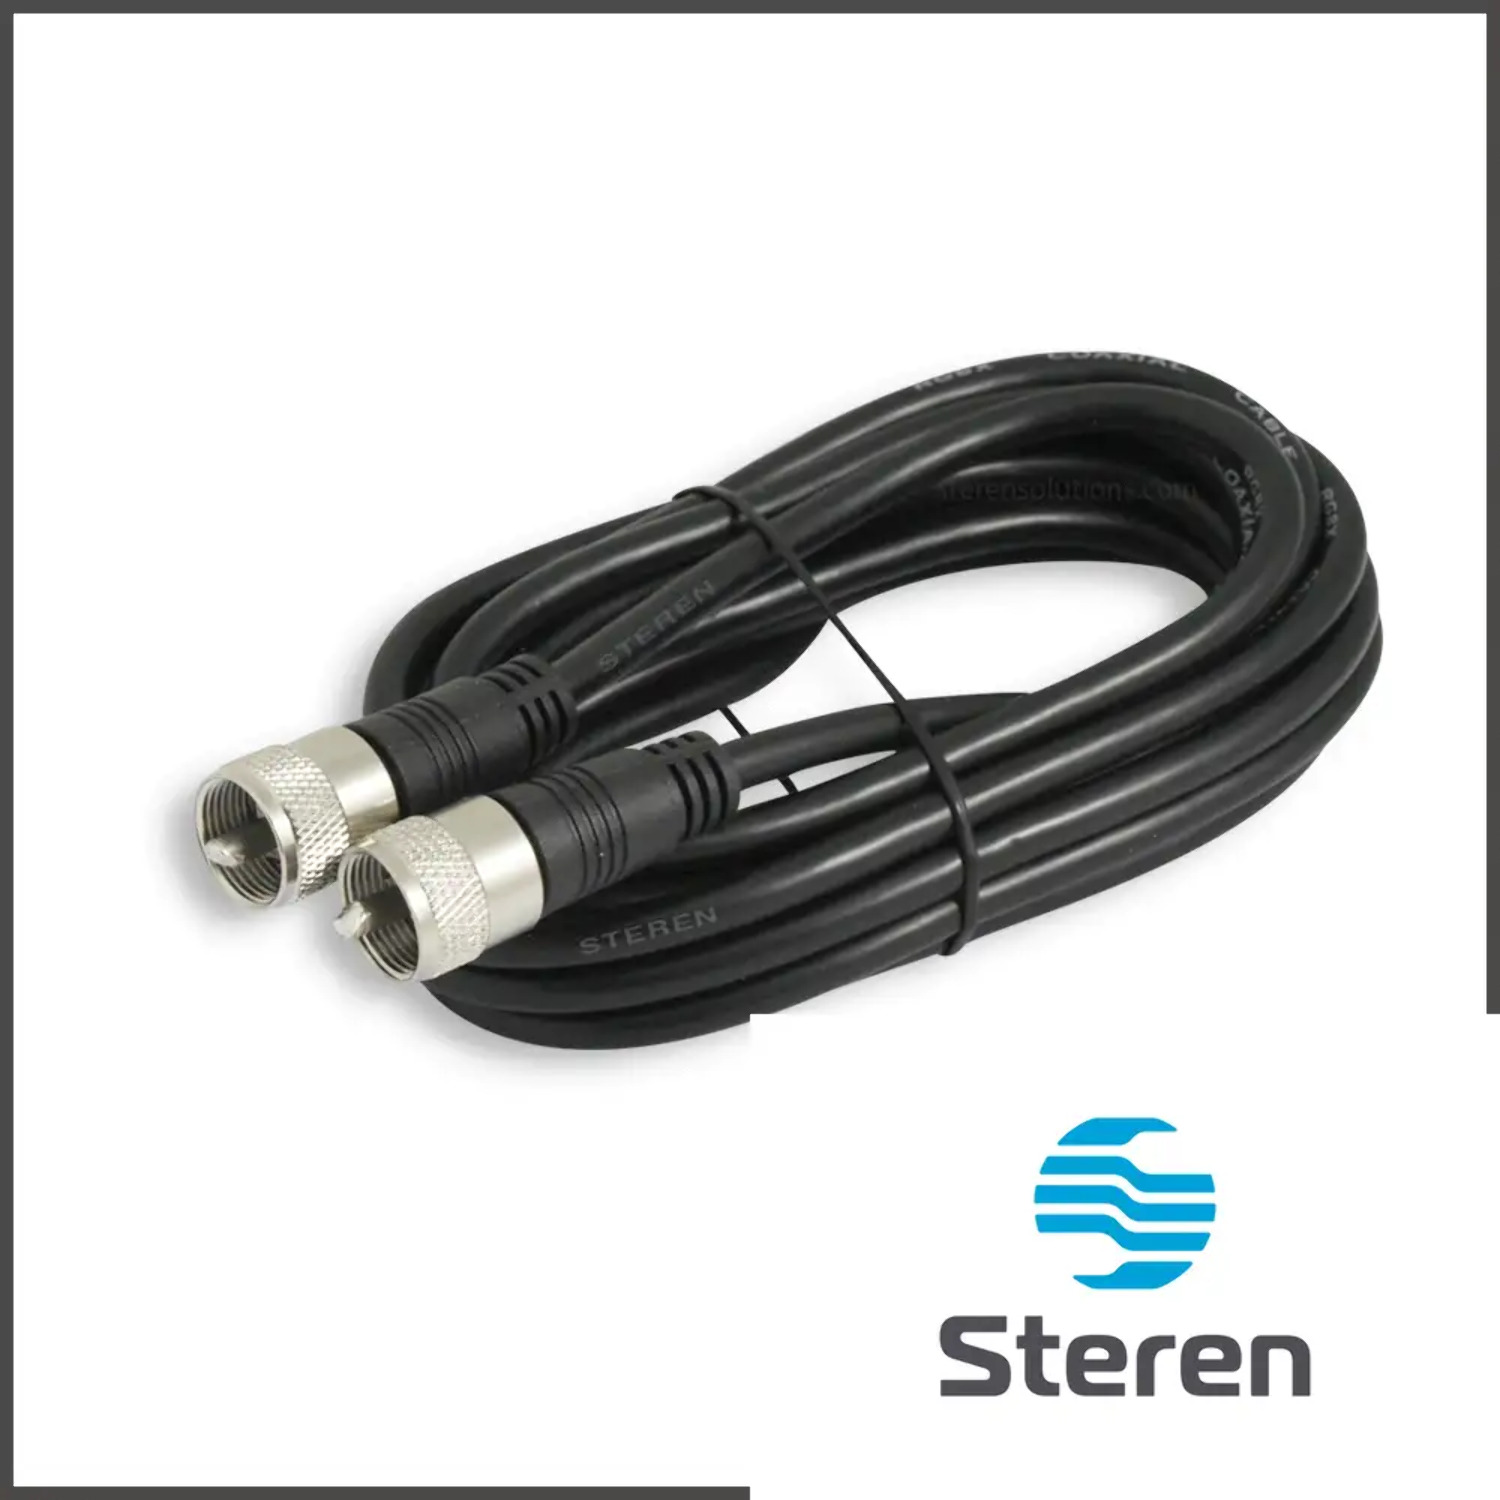 Steren 12ft UHF-UHF Mini-RG8x Cable - image 1 of 2